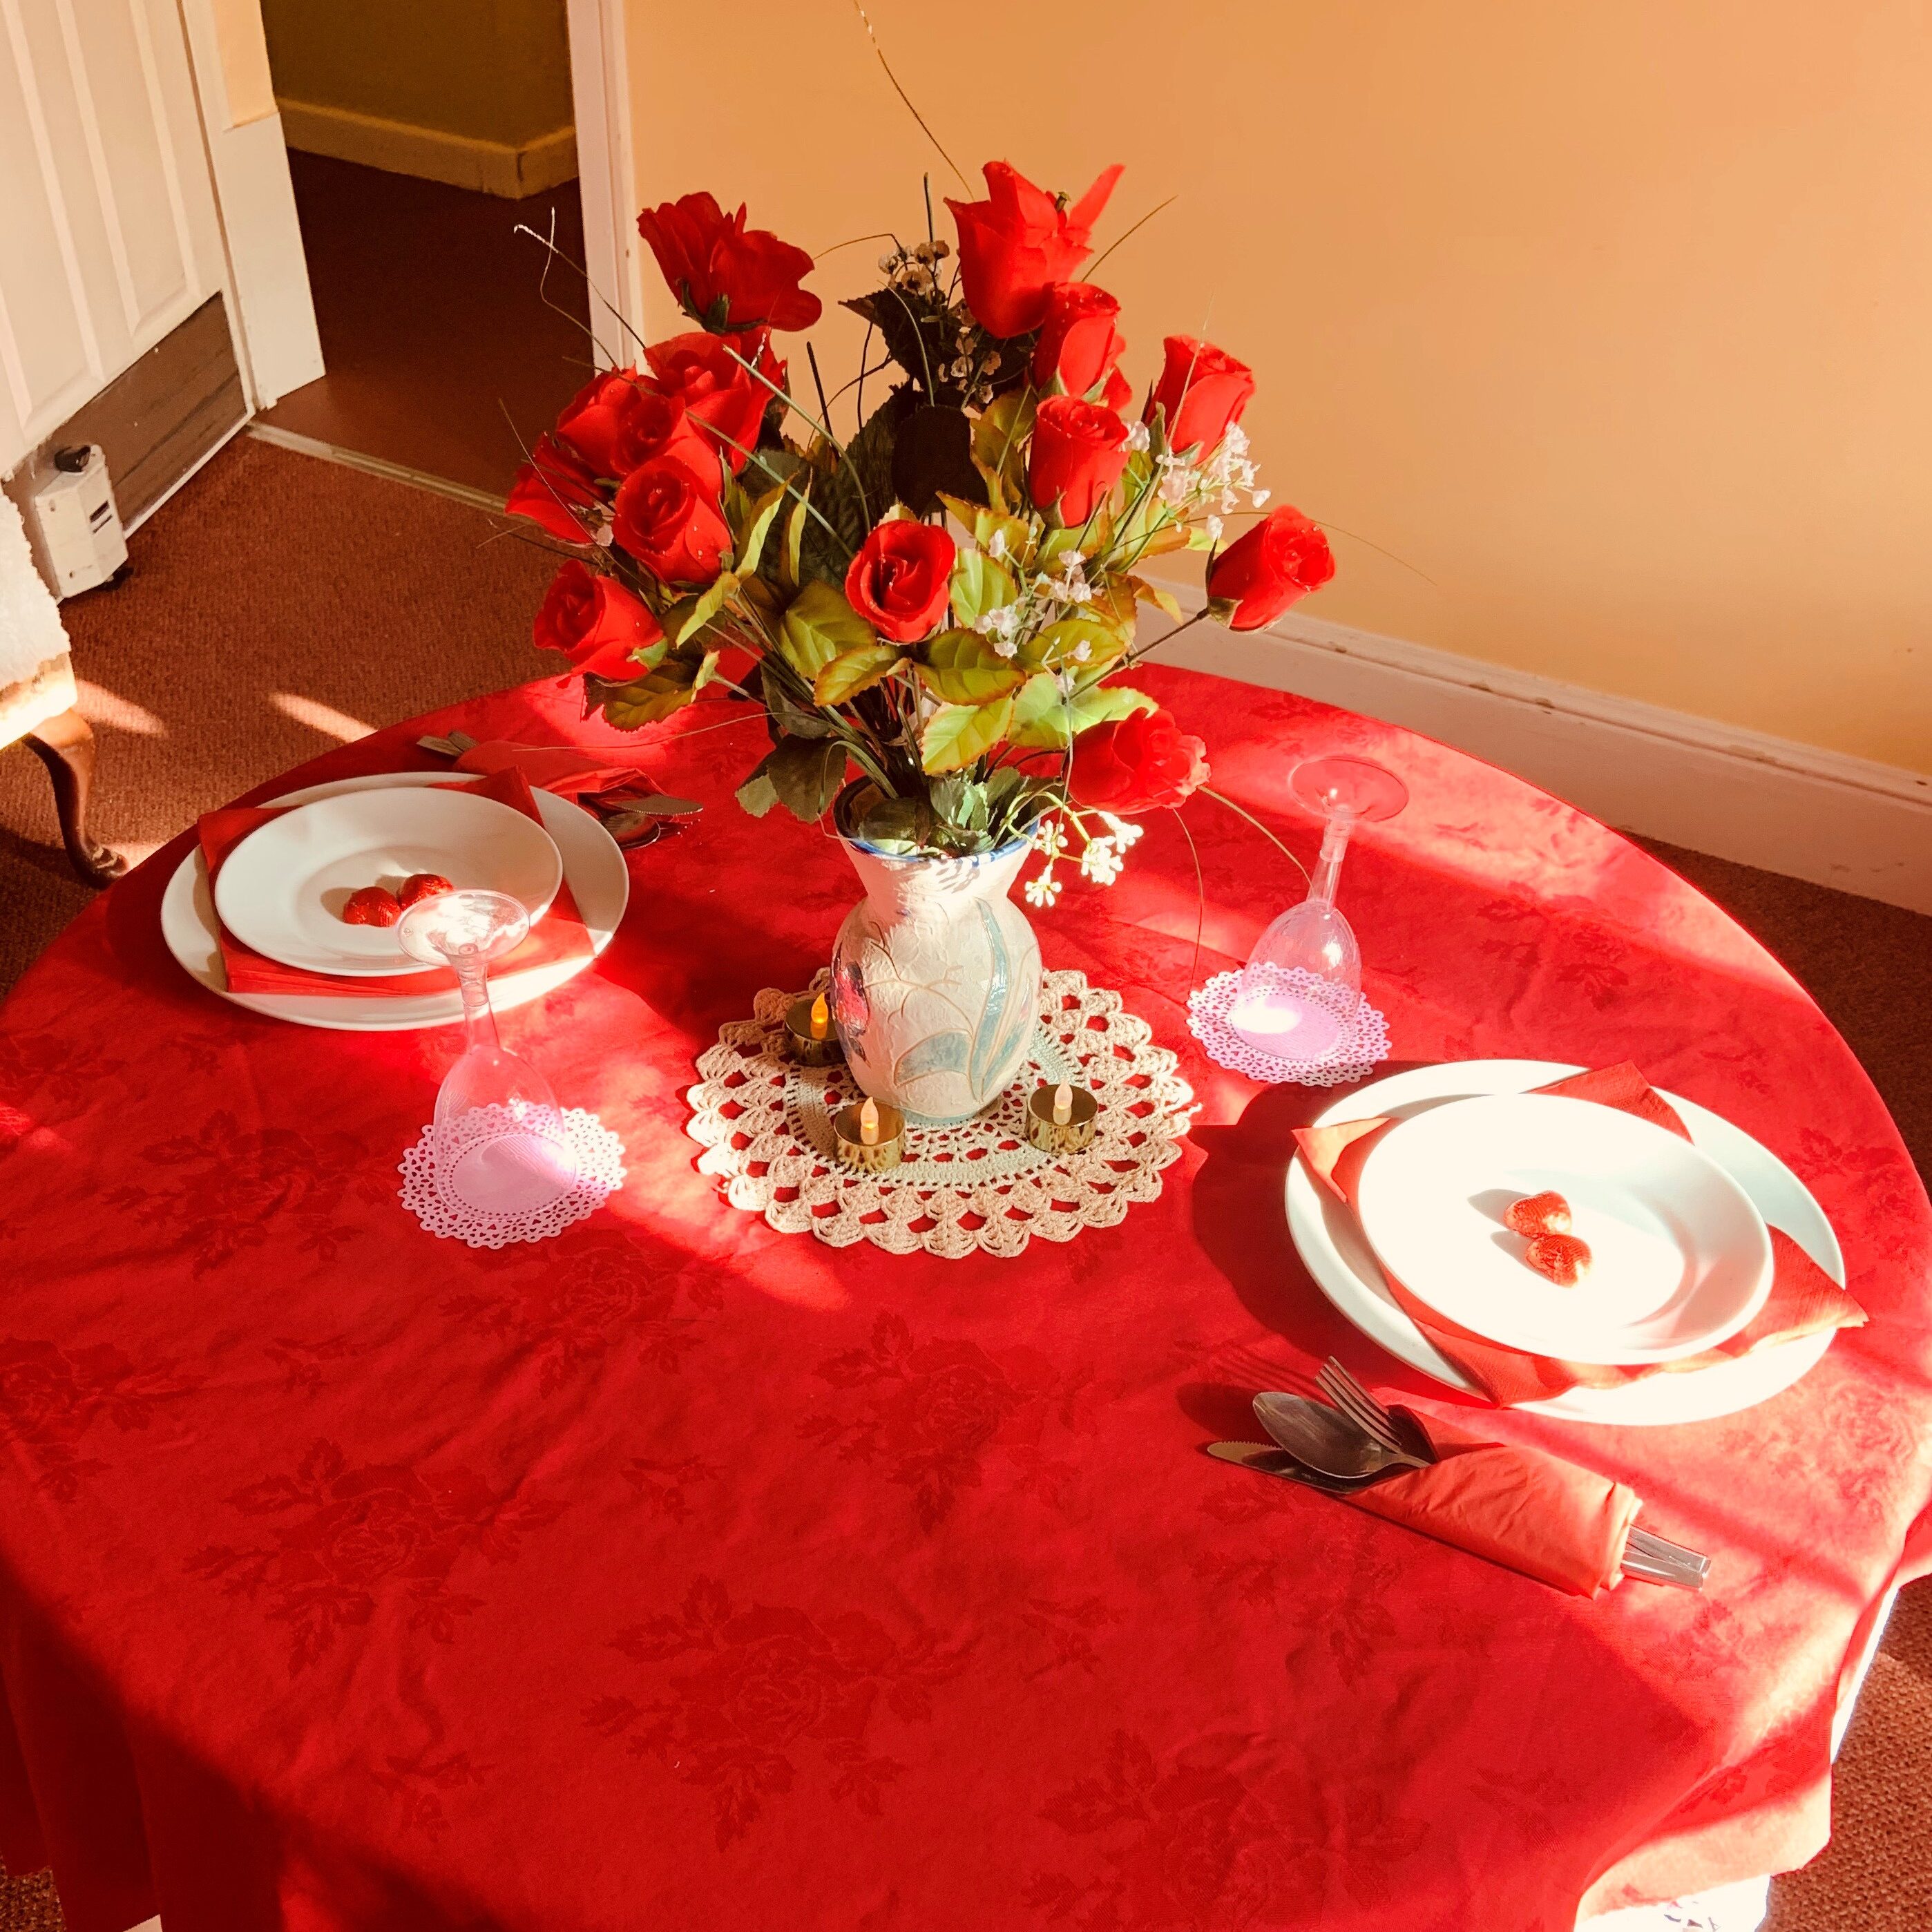 Shows a table laid for two. Red tablecloth, white dinner service with red napkins and a beautiful flower display of roses in crystal glass with white doiley.